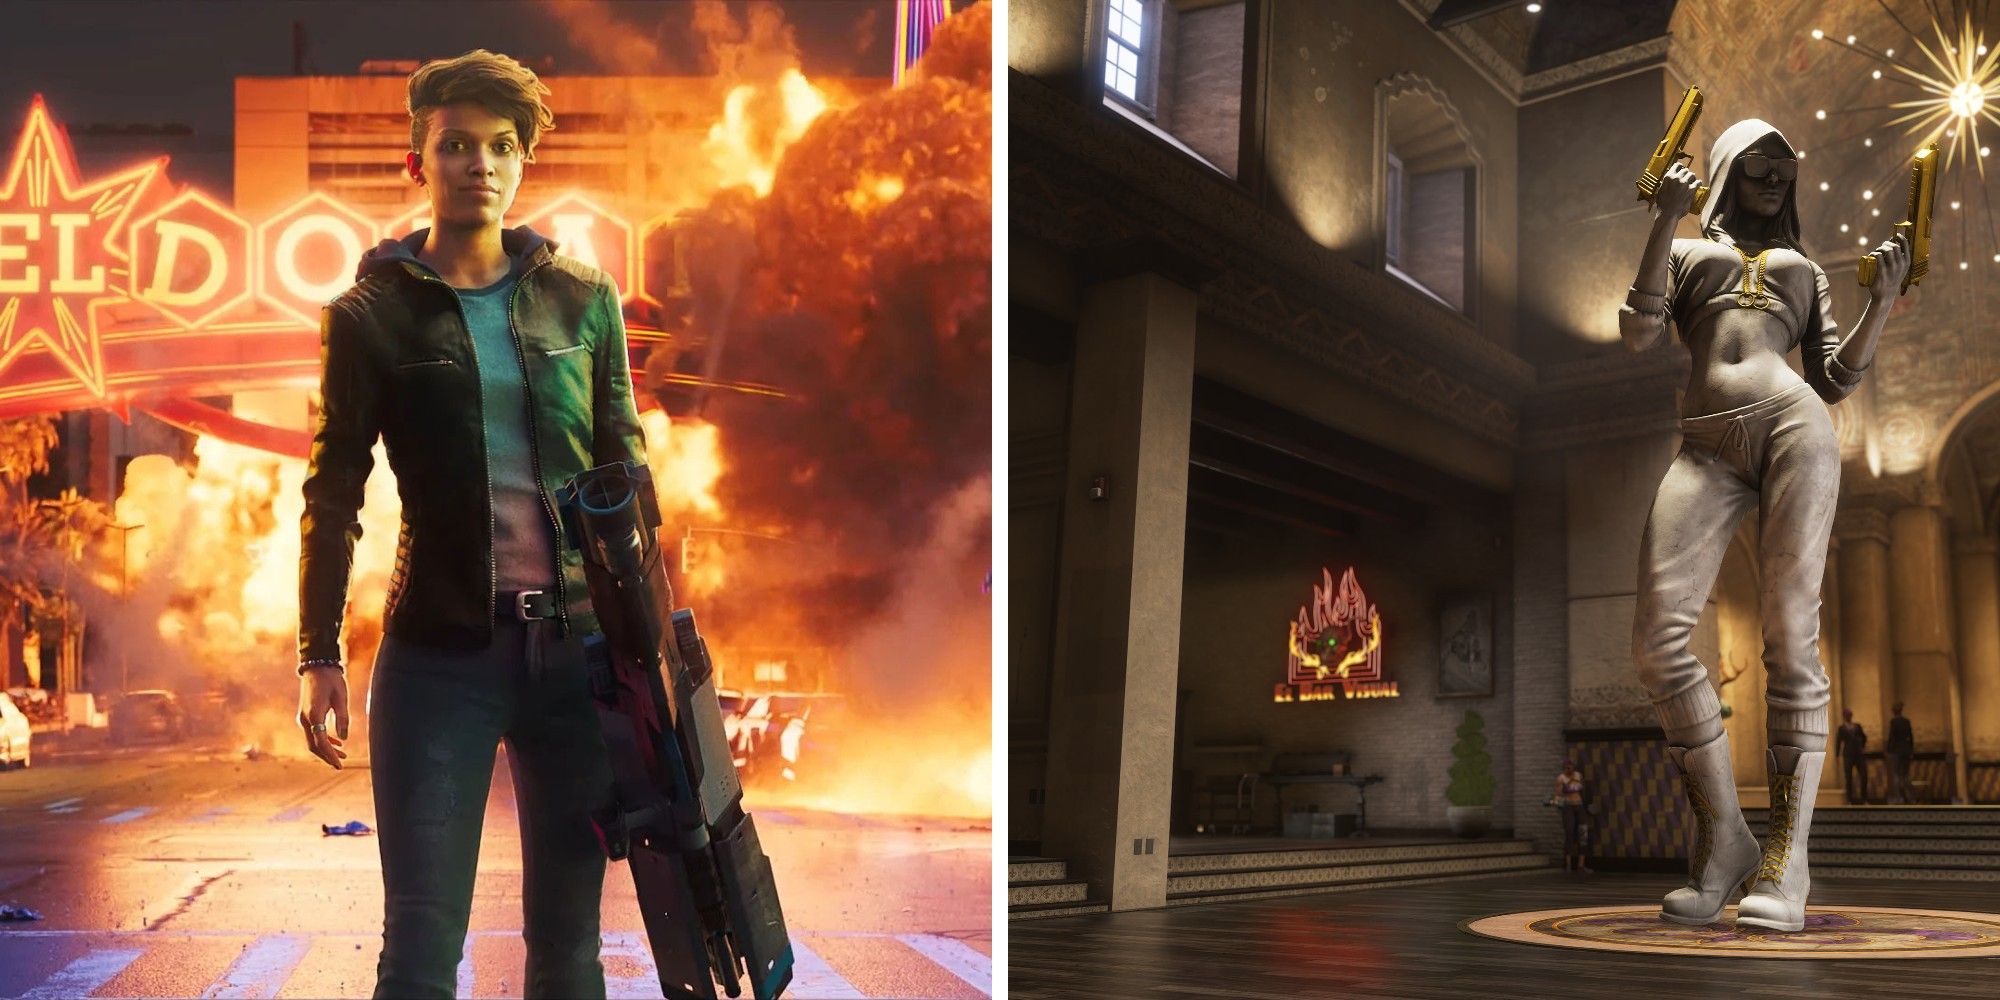 Saints Row character on the left and inside the headquarters picture on the right.